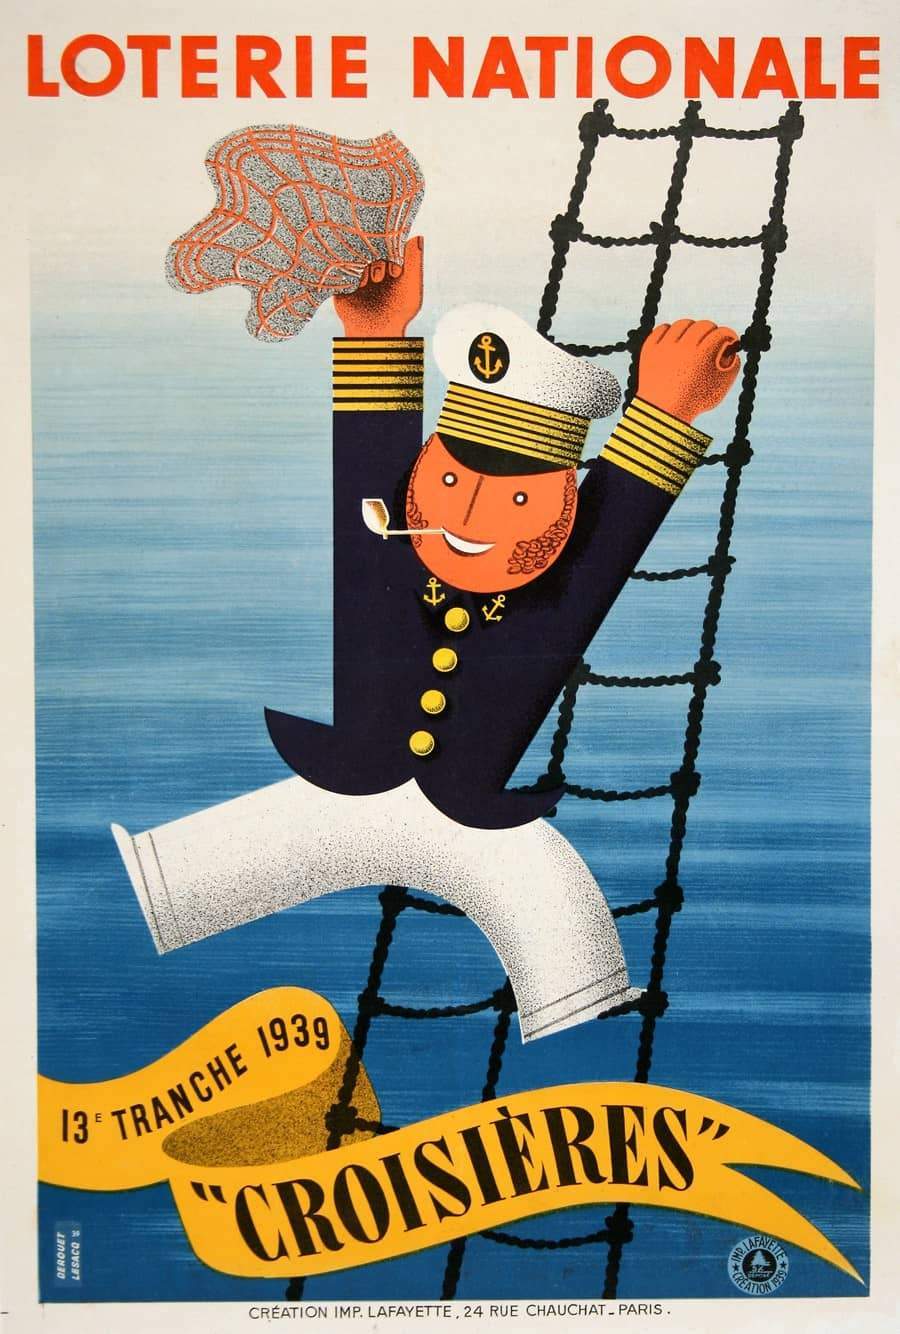 Derouet Lesacq Poster for Loterie Nationale France 1939 Croisieres